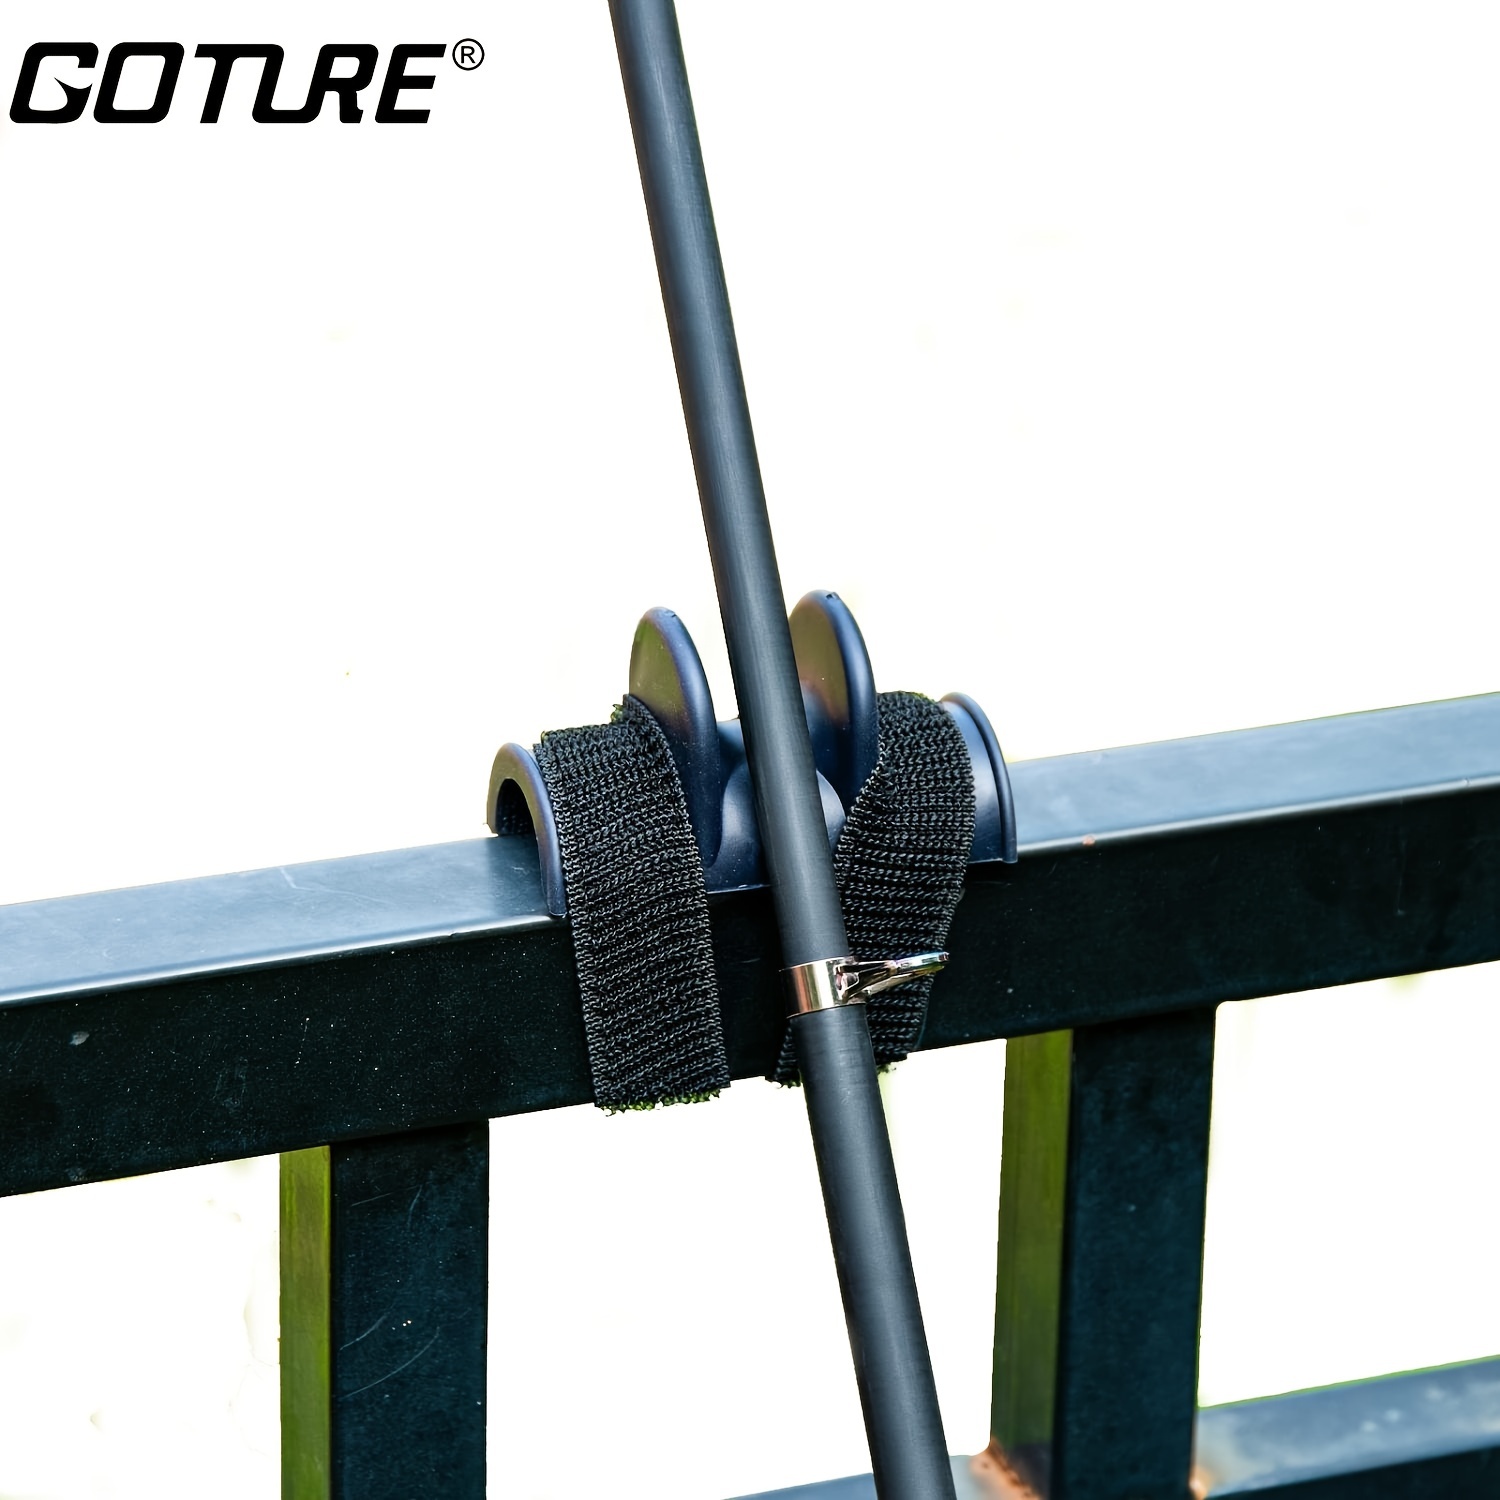 Portable U-Shaped Fishing Rod Holder - Get More Fish with *!